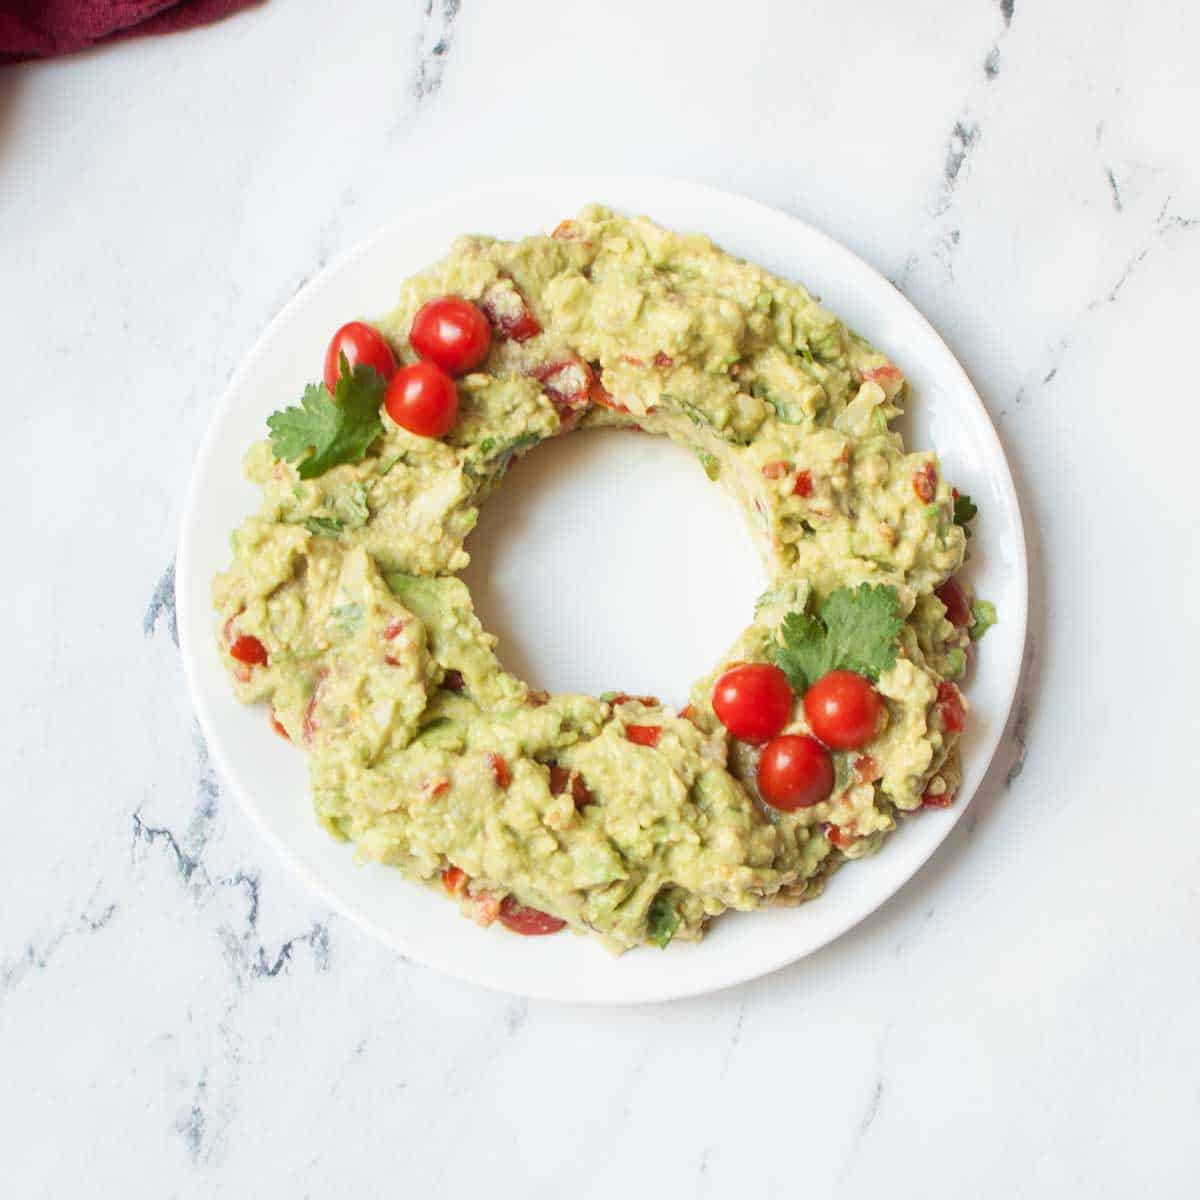 guacamole on a plate in the shape of a Christmas wreath